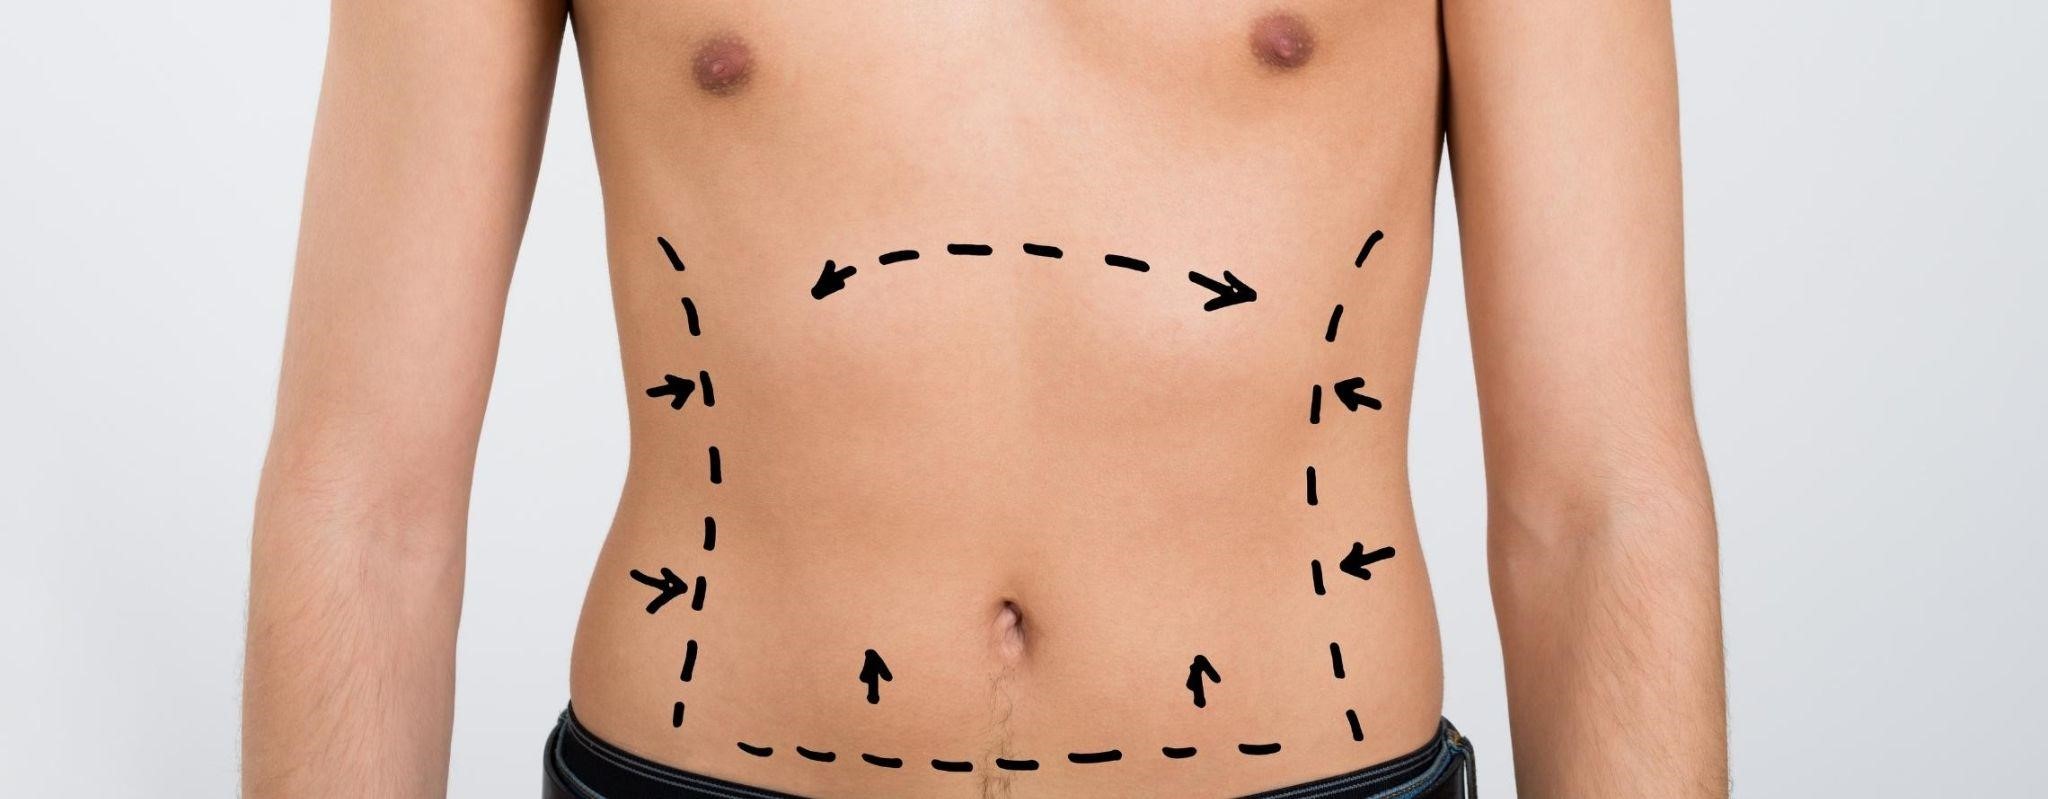 liposuction surgery in India